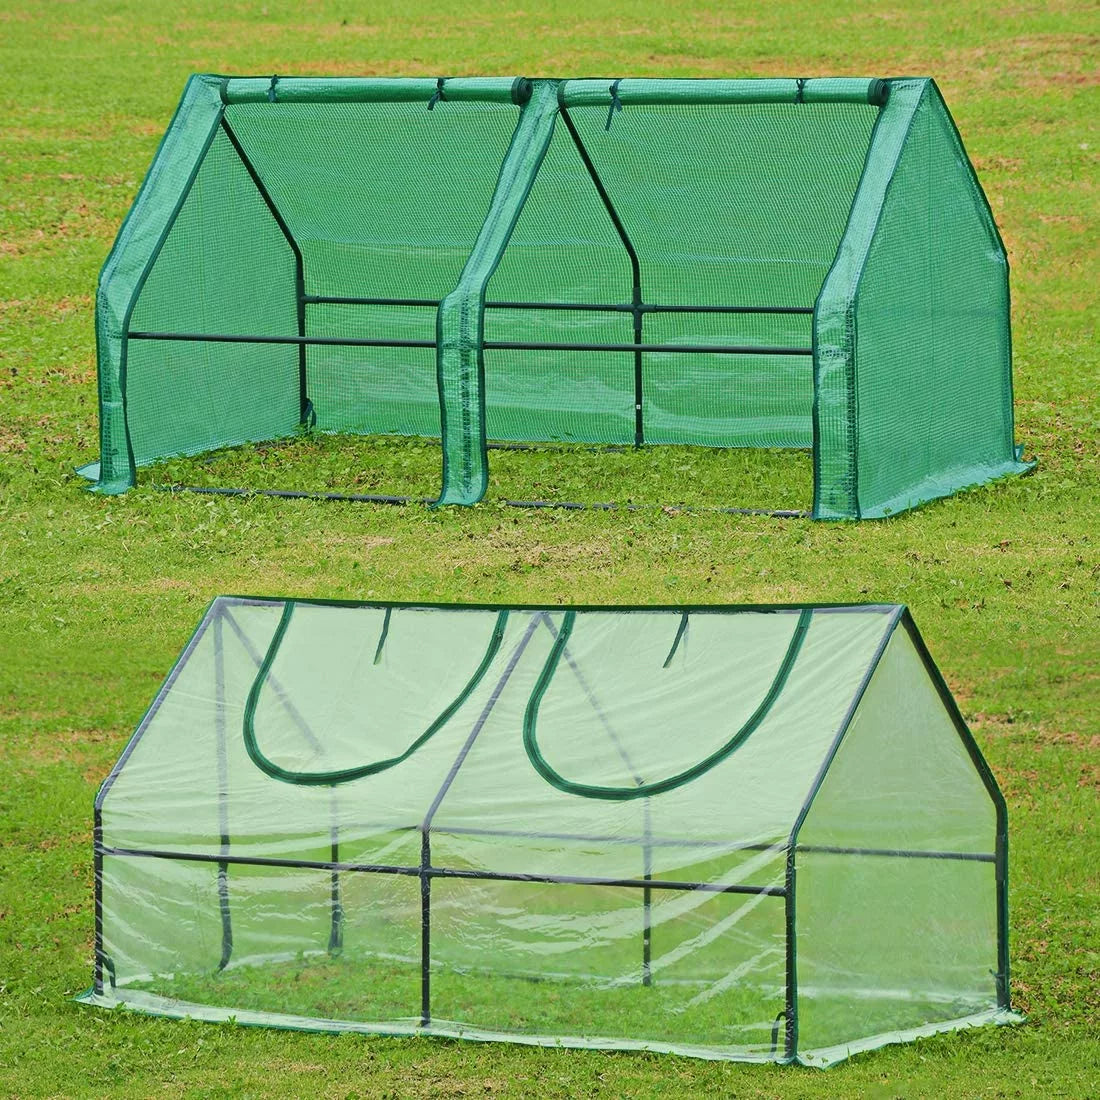 Mini greenhouse with two covers